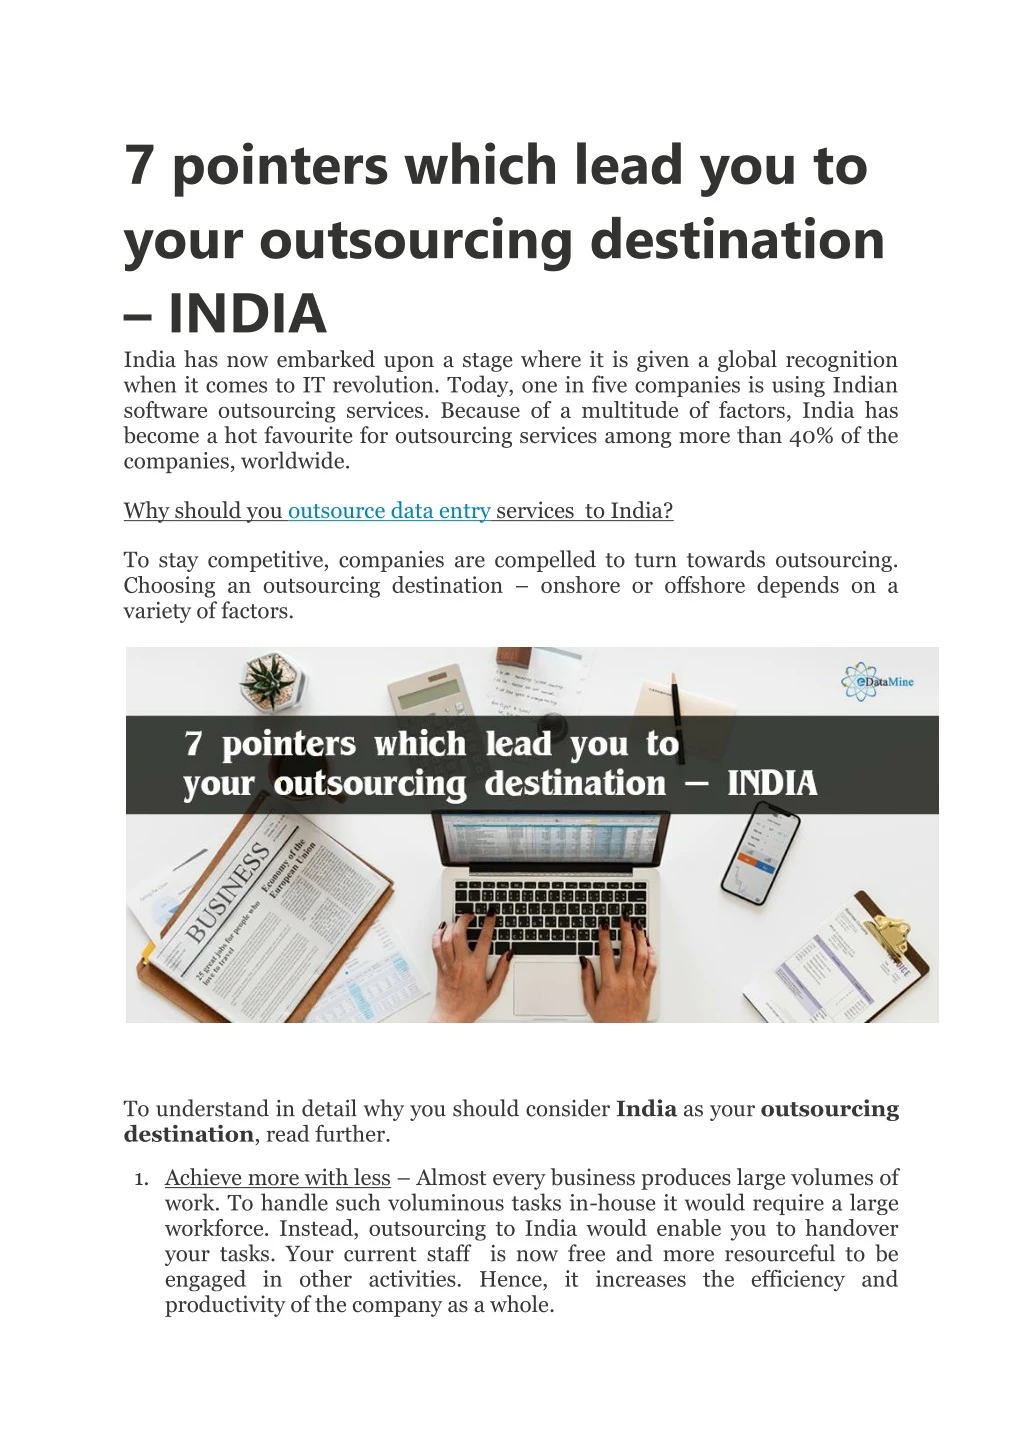 7 pointers which lead you to your outsourcing